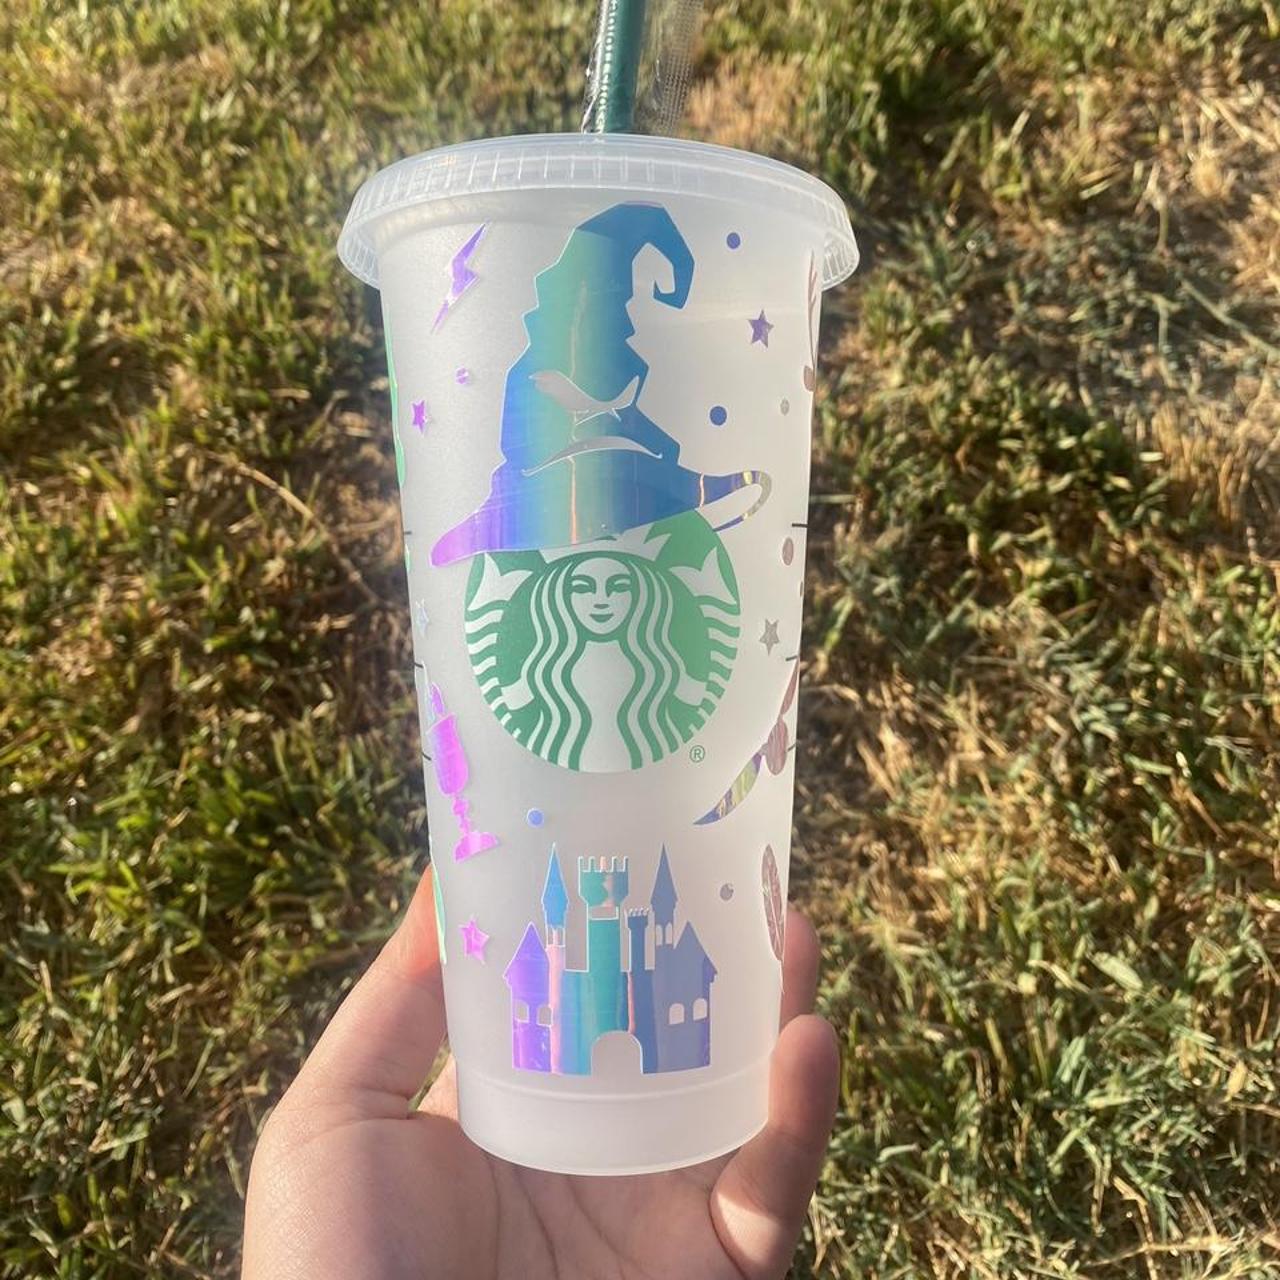 Harry Styles Sunflower Watermelon Personalized Starbucks Cup